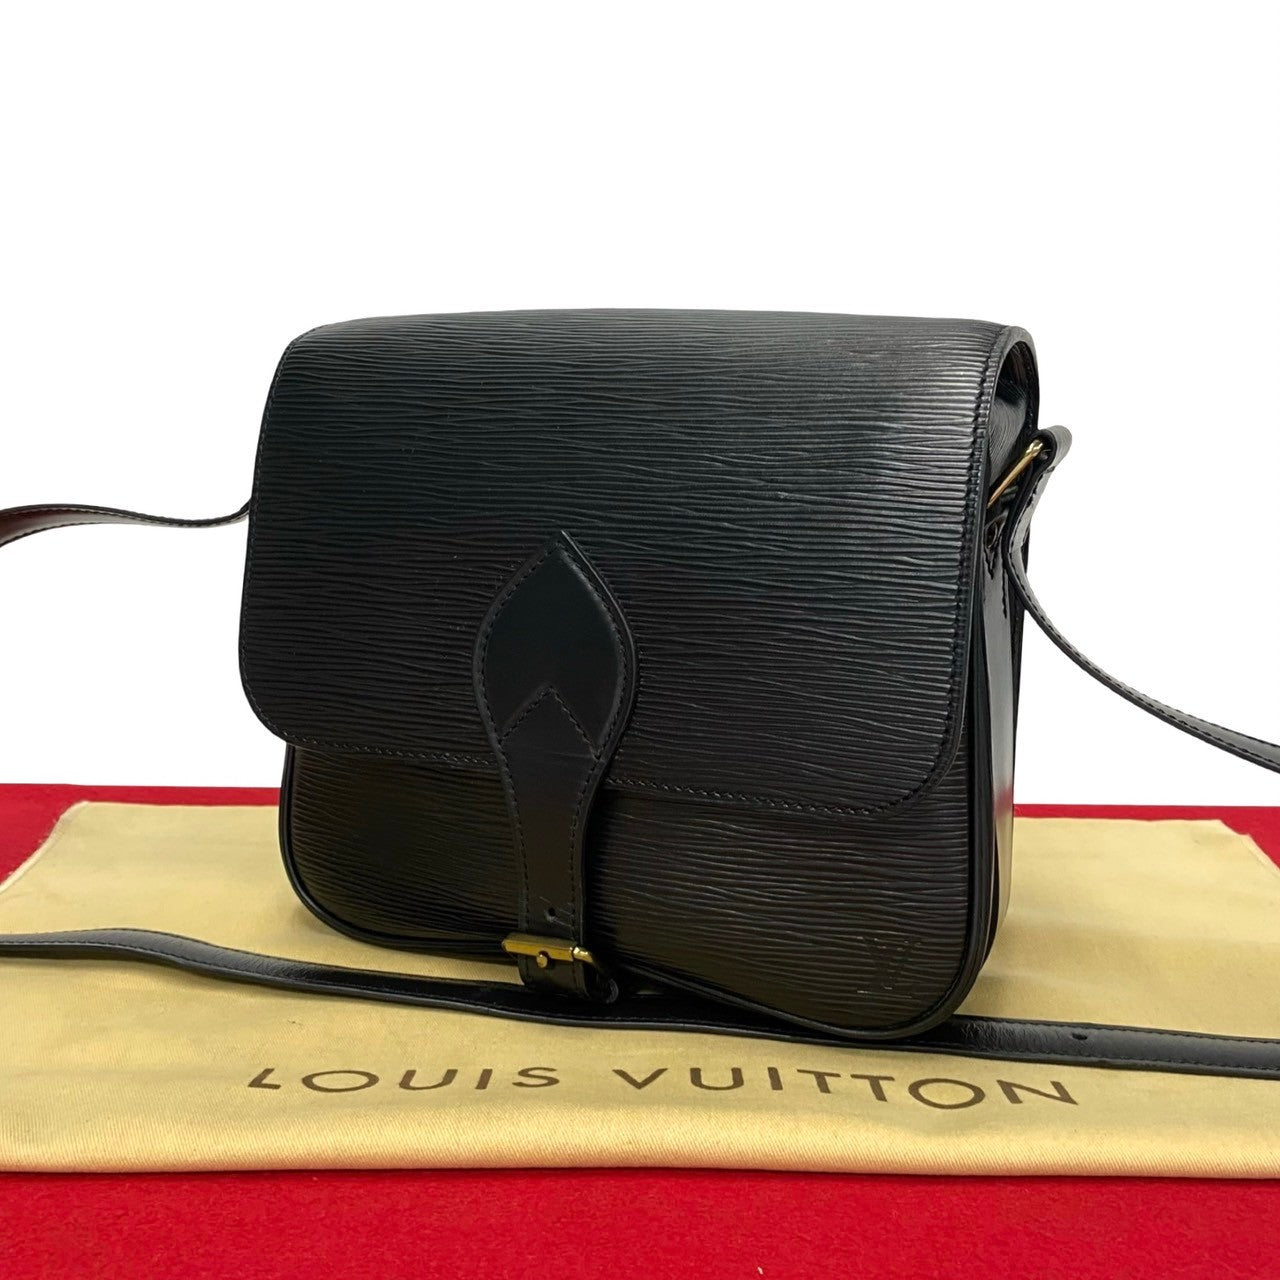 Louis Vuitton Cartouchiere Leather Crossbody Bag M52242 in Good condition